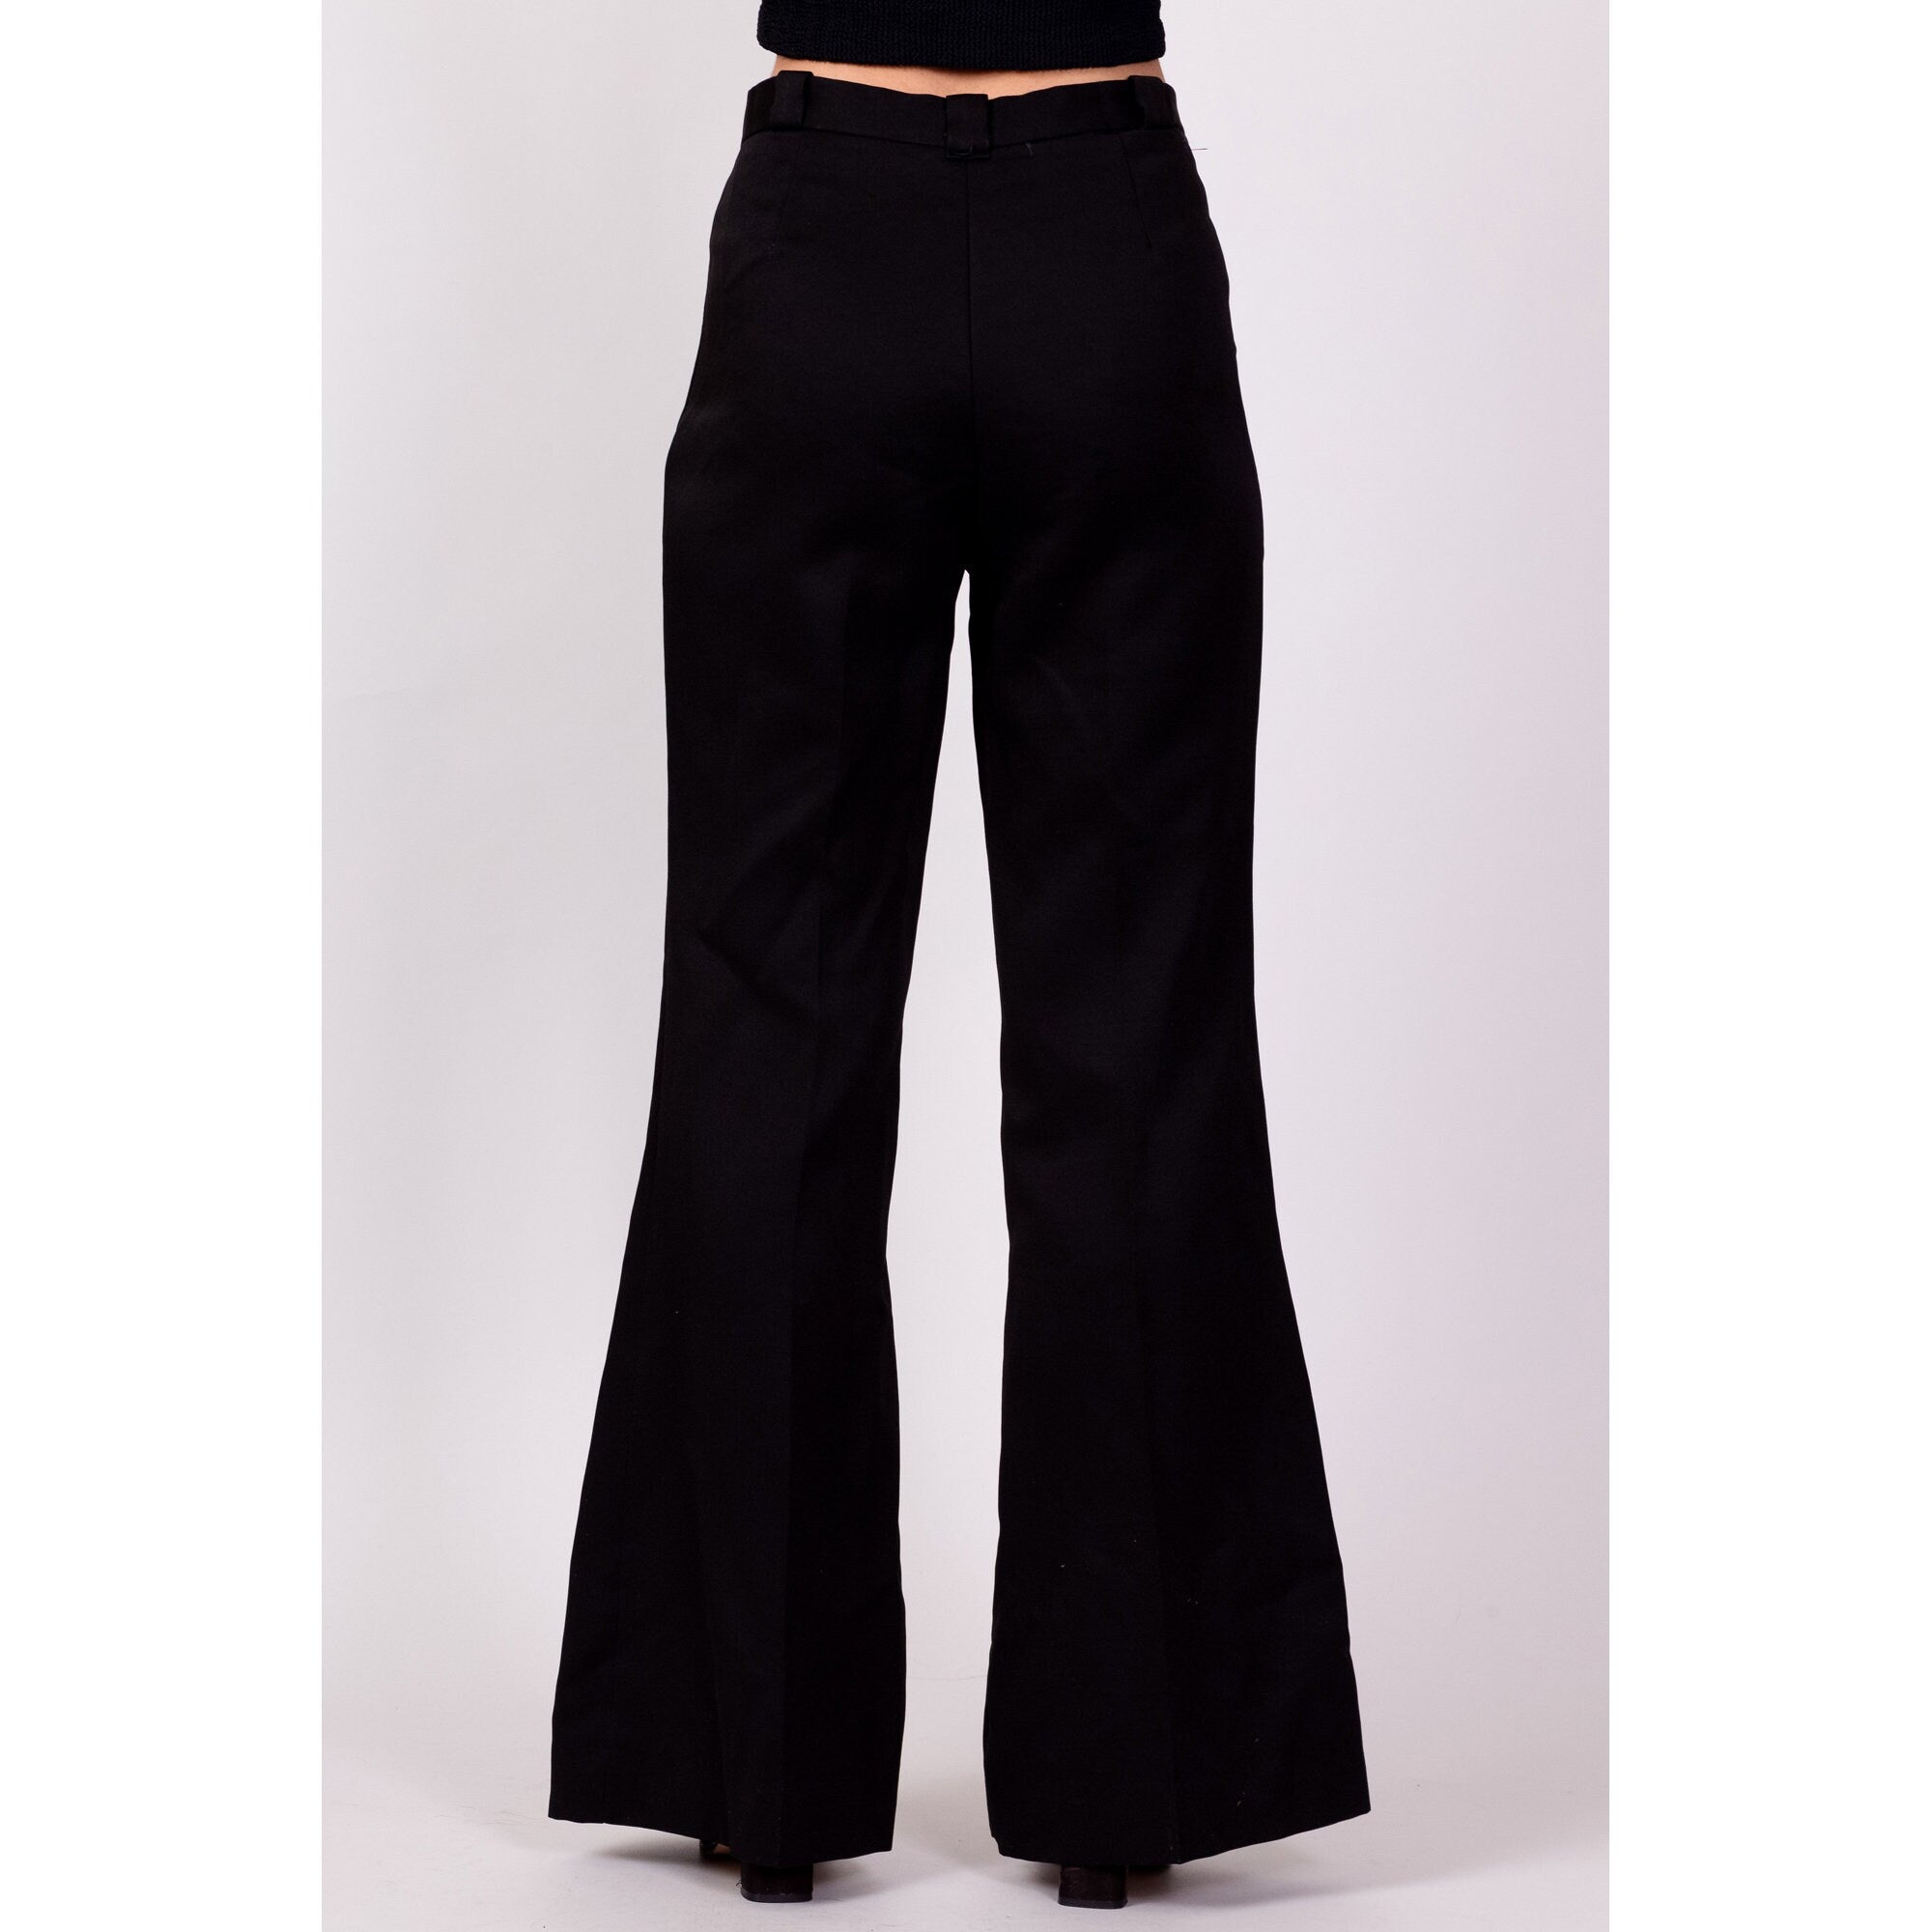 The High Waist Flare Pant is our latest style addition to our stretch dress  pant collection. For added style this tall pant features a wide flare leg  and a subtle full front